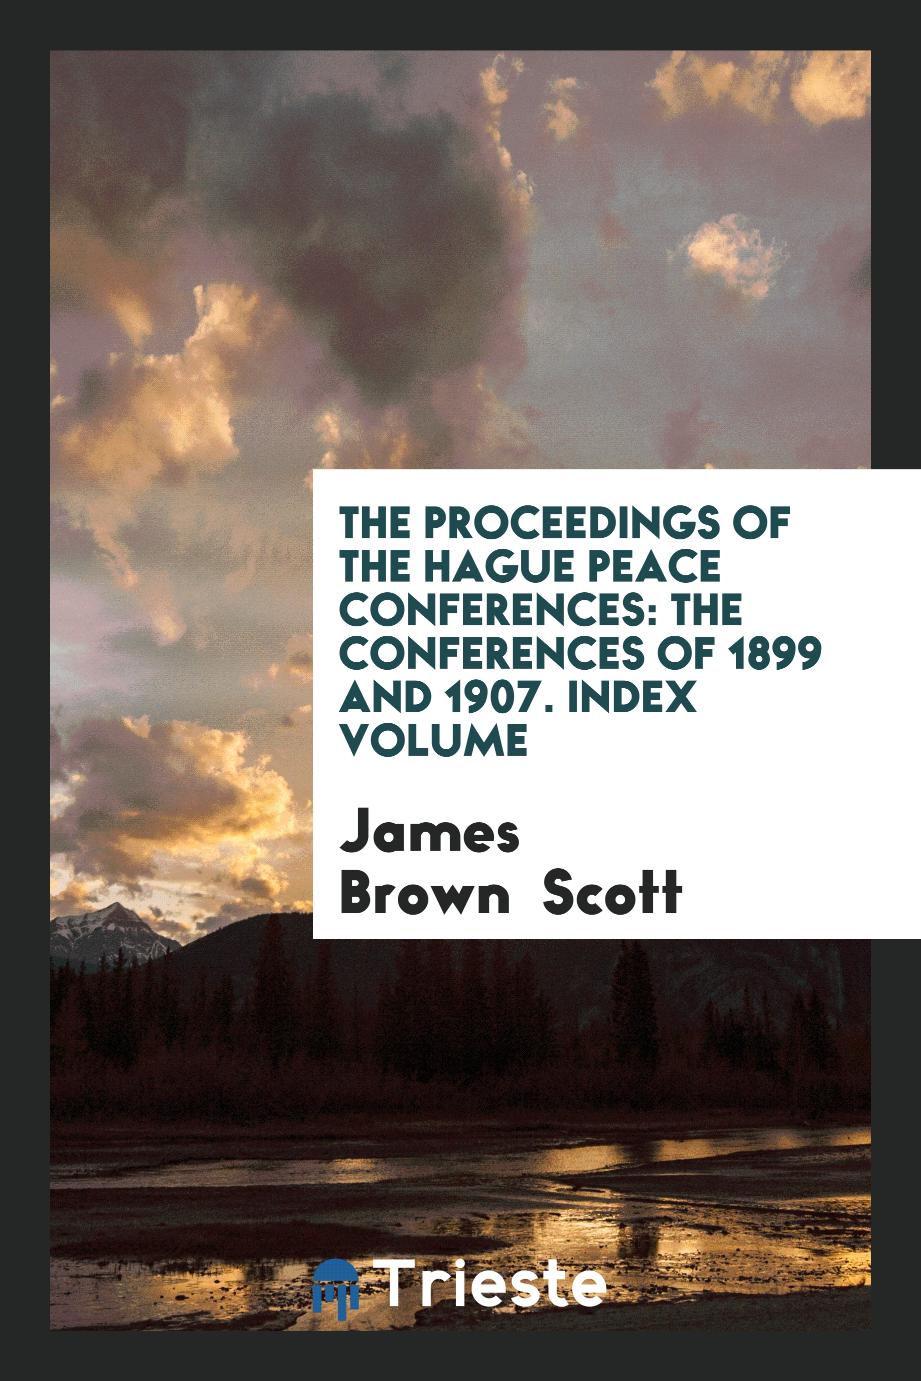 The Proceedings of the Hague Peace Conferences: The Conferences of 1899 and 1907. Index Volume